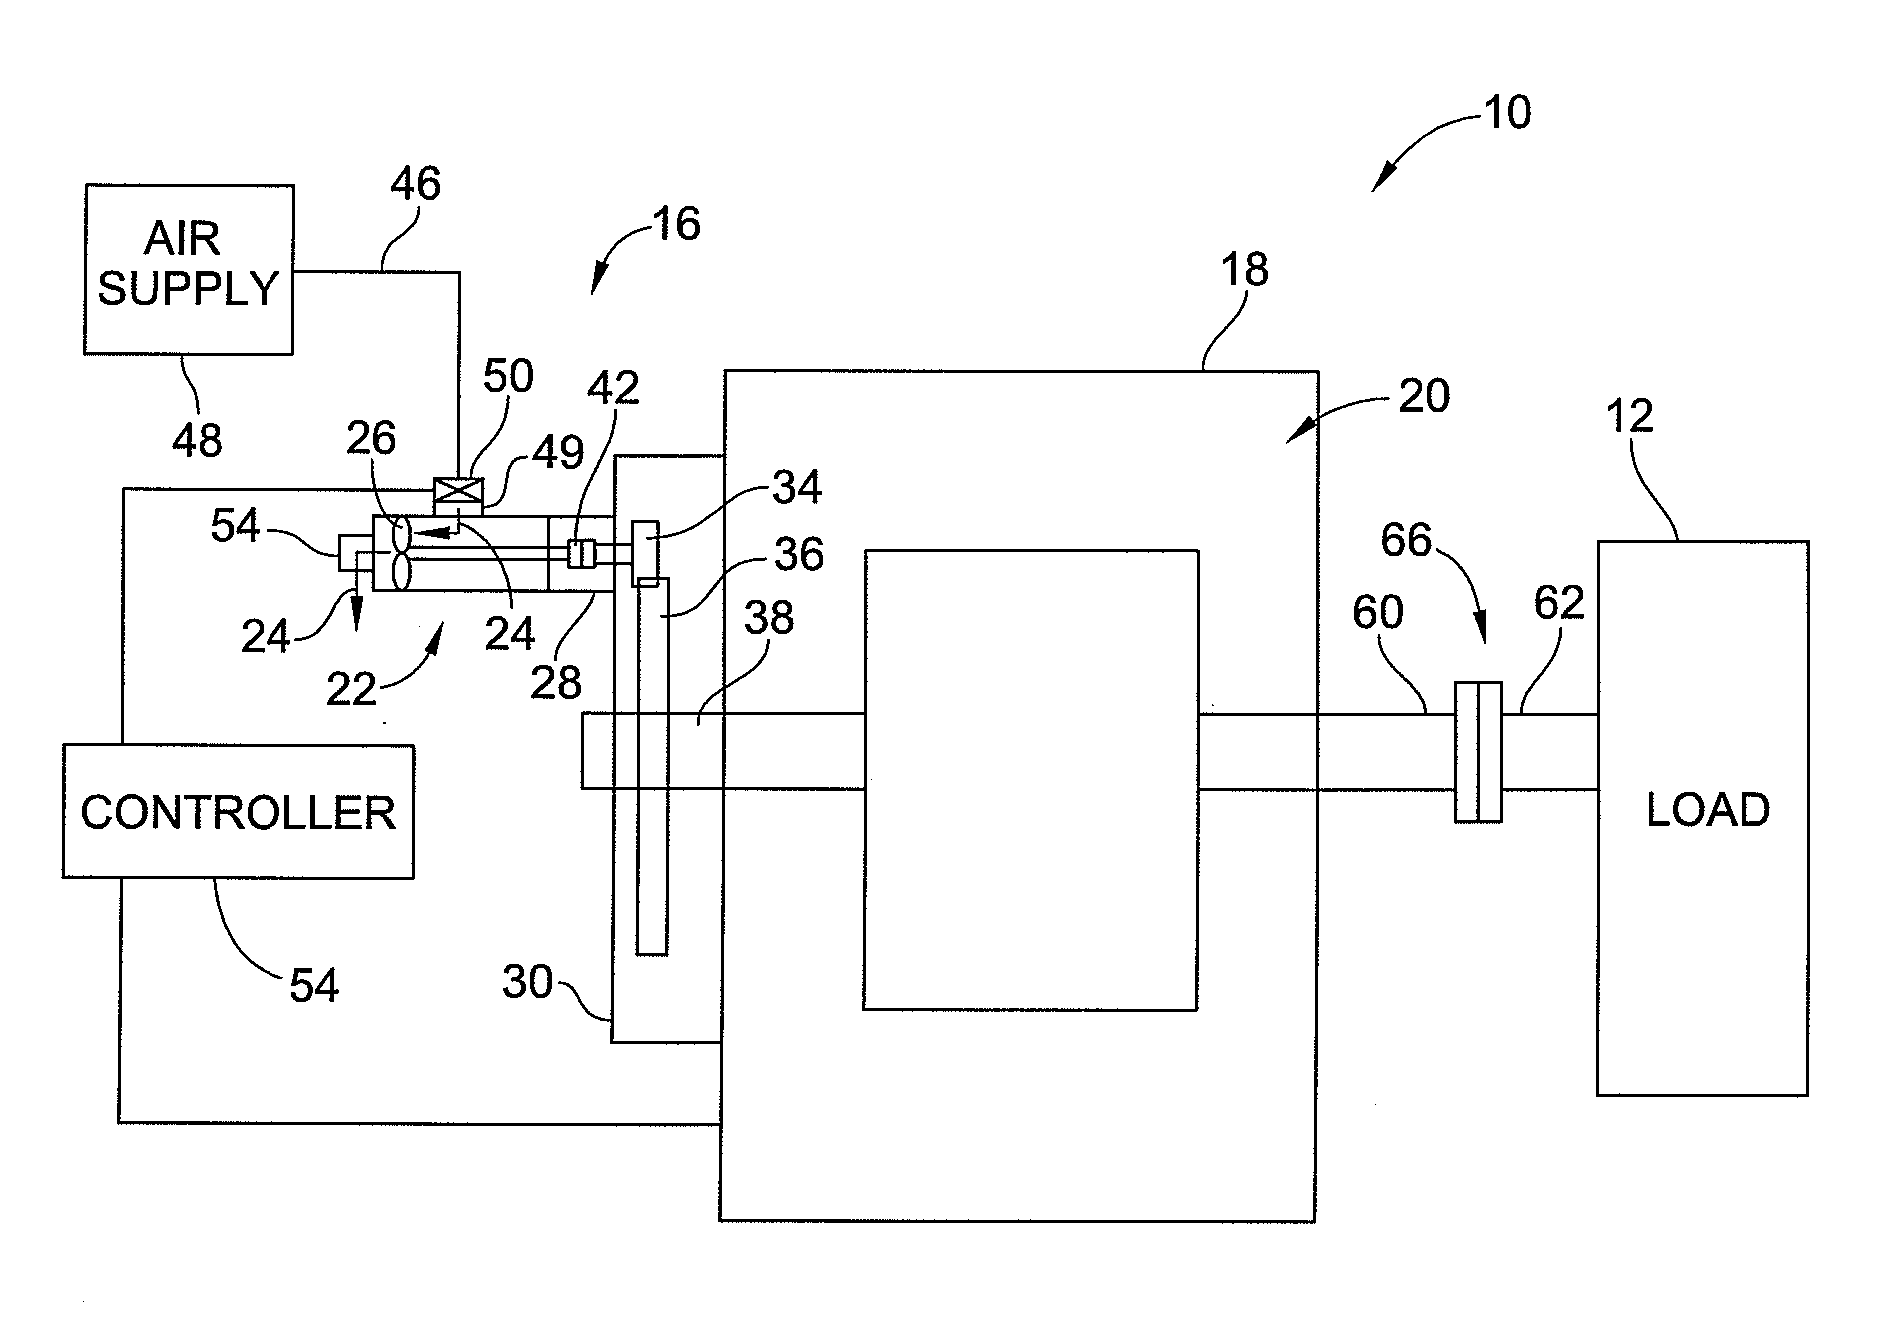 Turbo-Pneumatic Assist for Electric Motor Starting